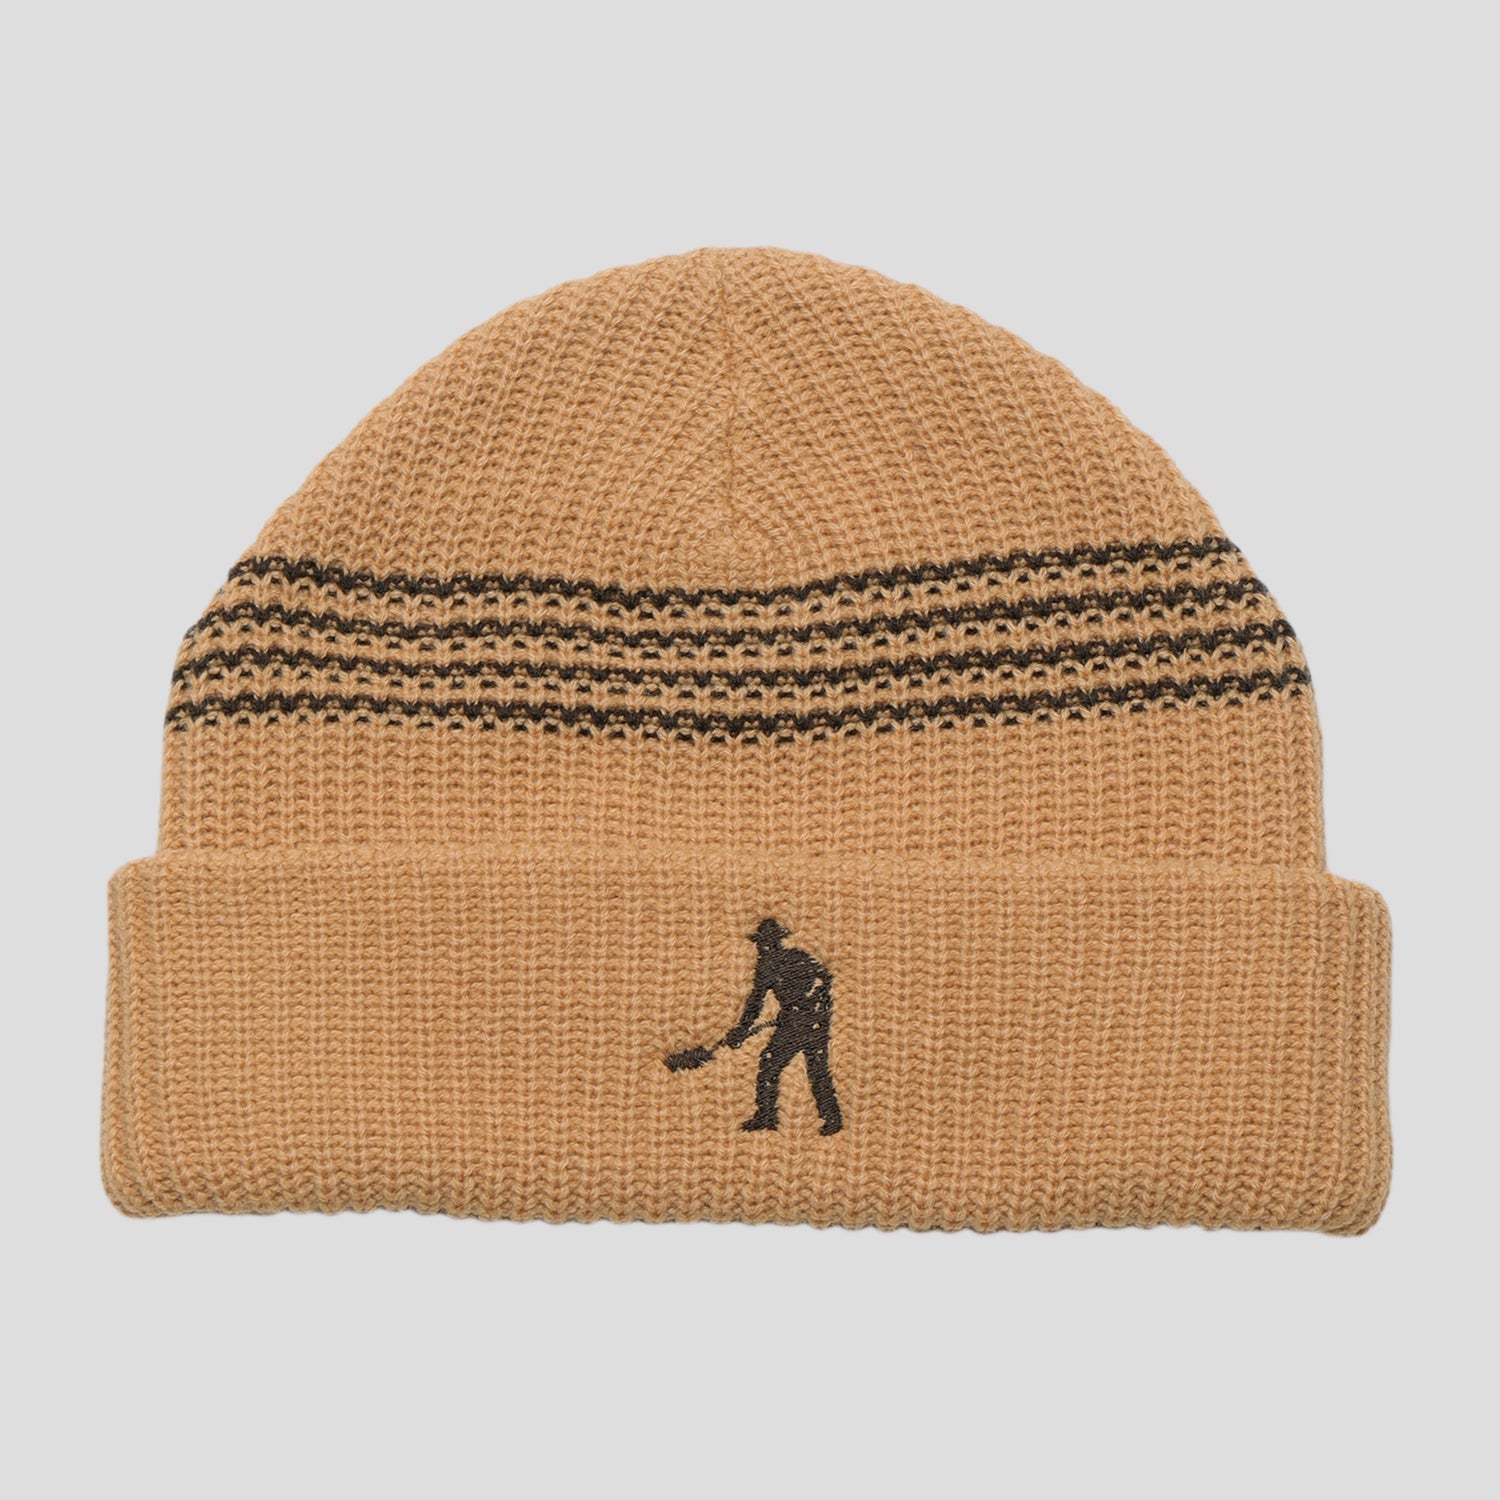 Pass~Port Digger Striped Knit Beanie - Sand / Chocolate